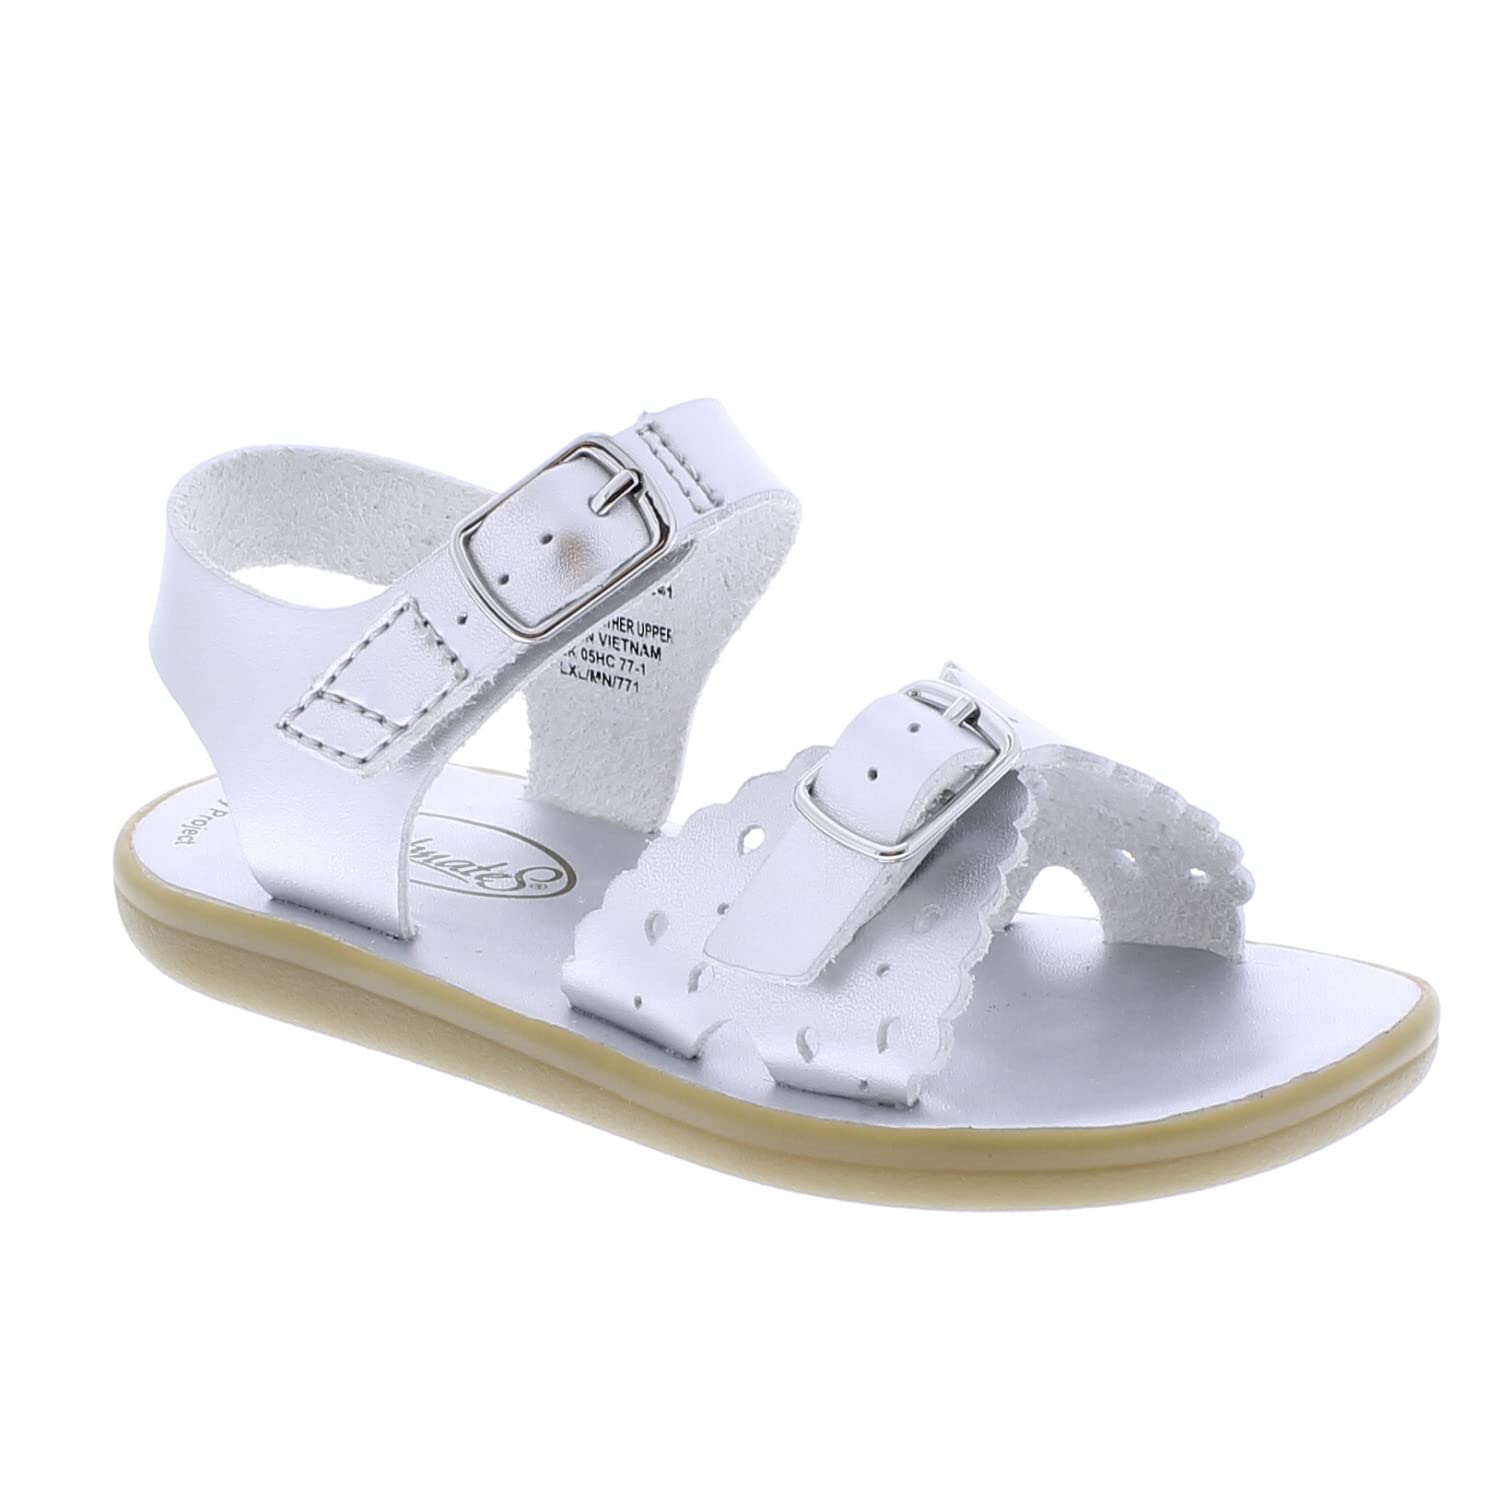 FOOTMATES Eco-Ariel Waterproof Sandals for Girls and Boys - Microfiber Vegan Nappa with Slip-Resistant Non-Marking Outsoles and Strap-Closure, Silver Micro - 11 Little Kid (4-8 years)